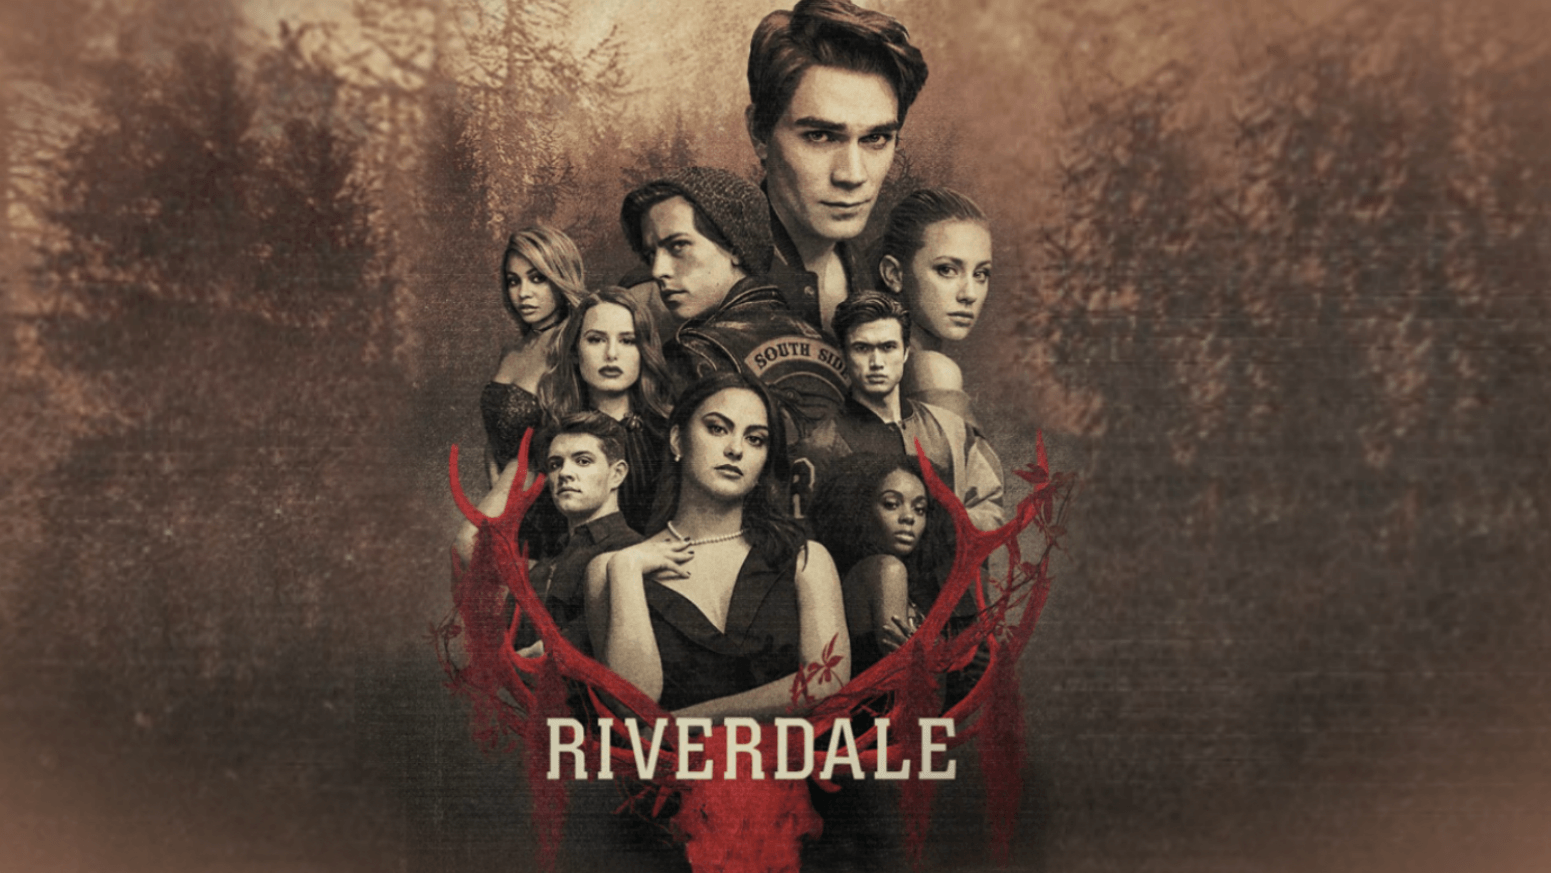 Riverdale Wallpaper For iPhone